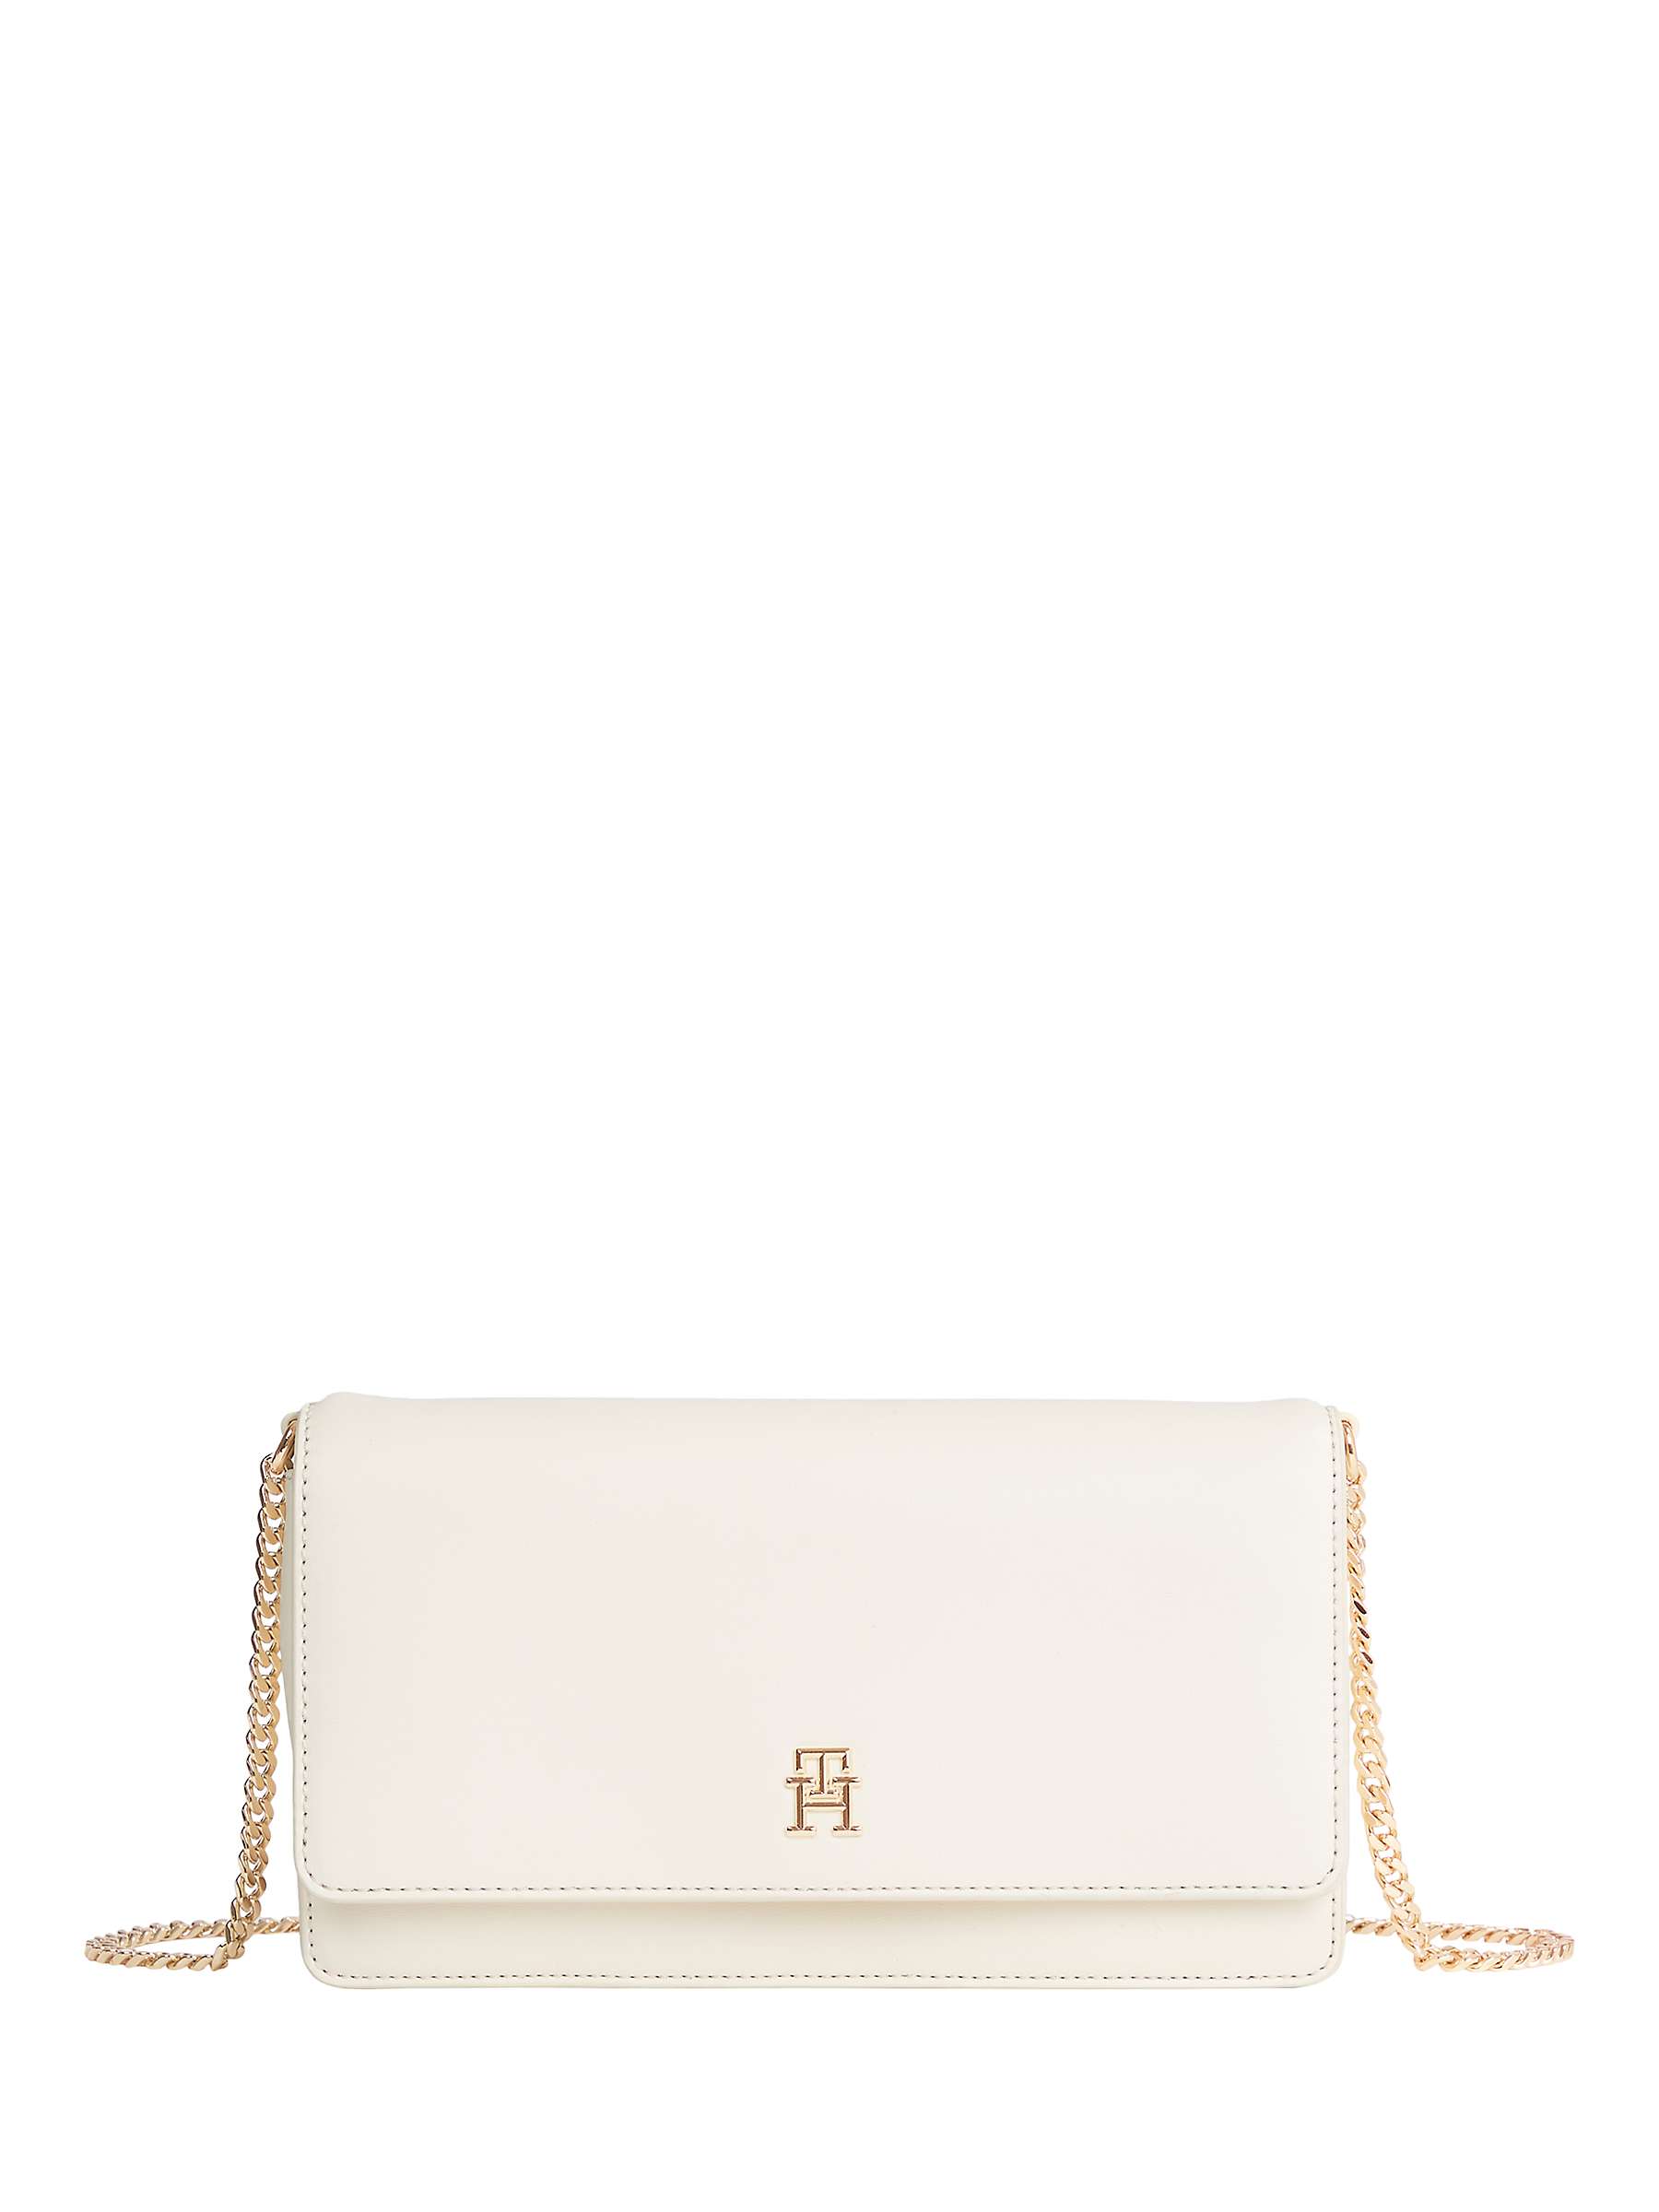 Buy Tommy Hilfiger Chain Strap Small Crossbody Bag, Calico Online at johnlewis.com